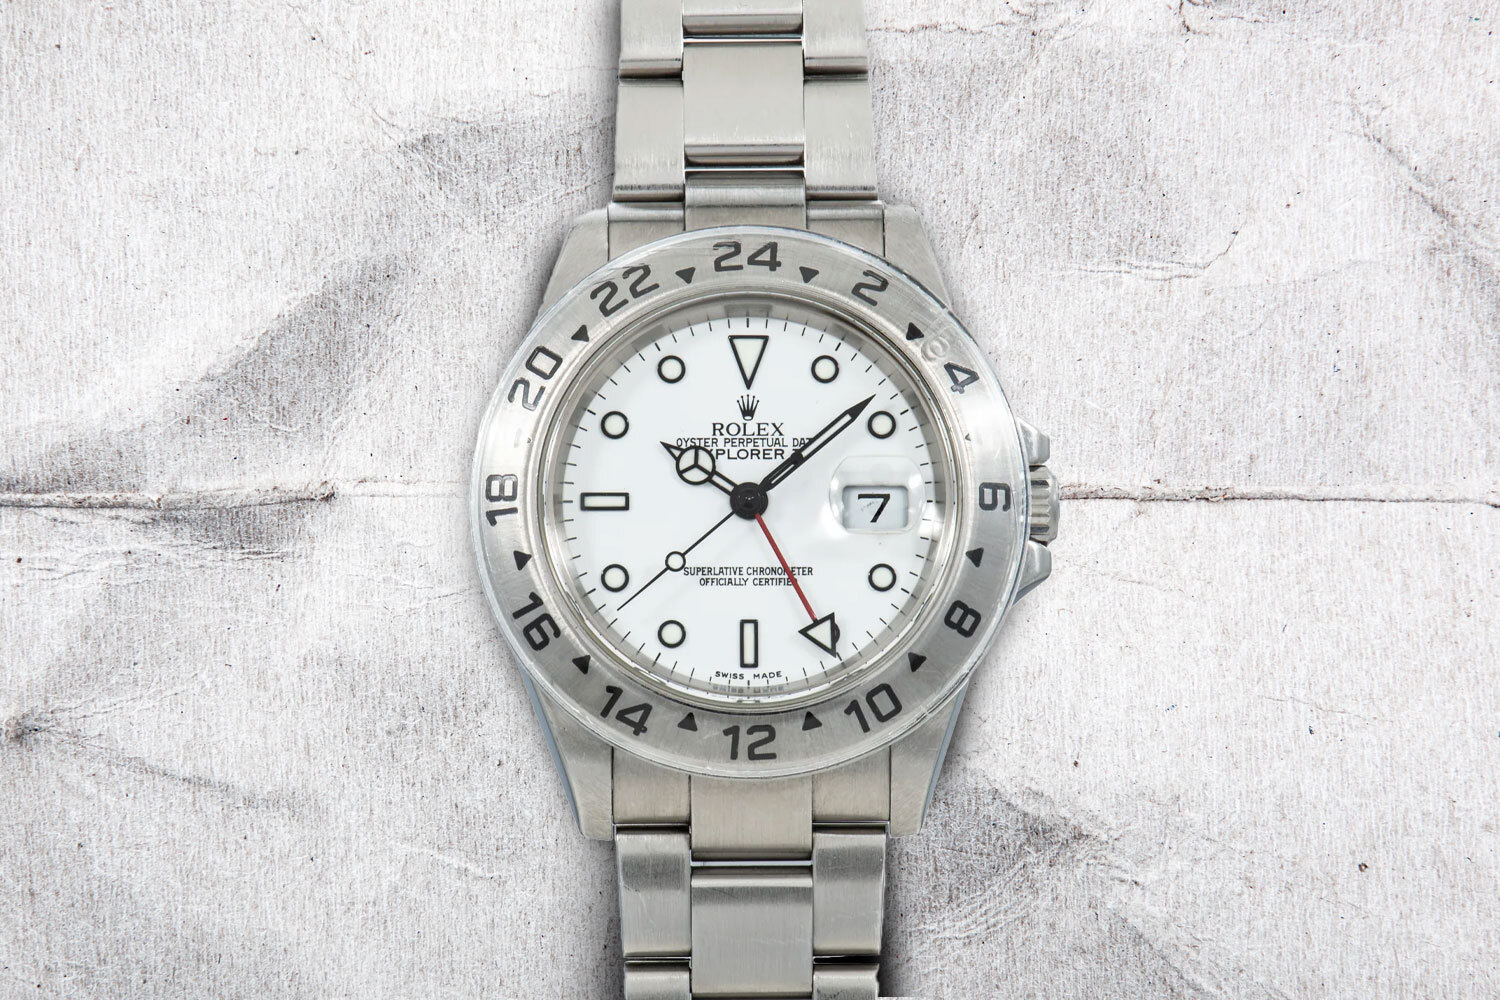 The Rolex Explorer II is one of the best vintage watches under $10,000.